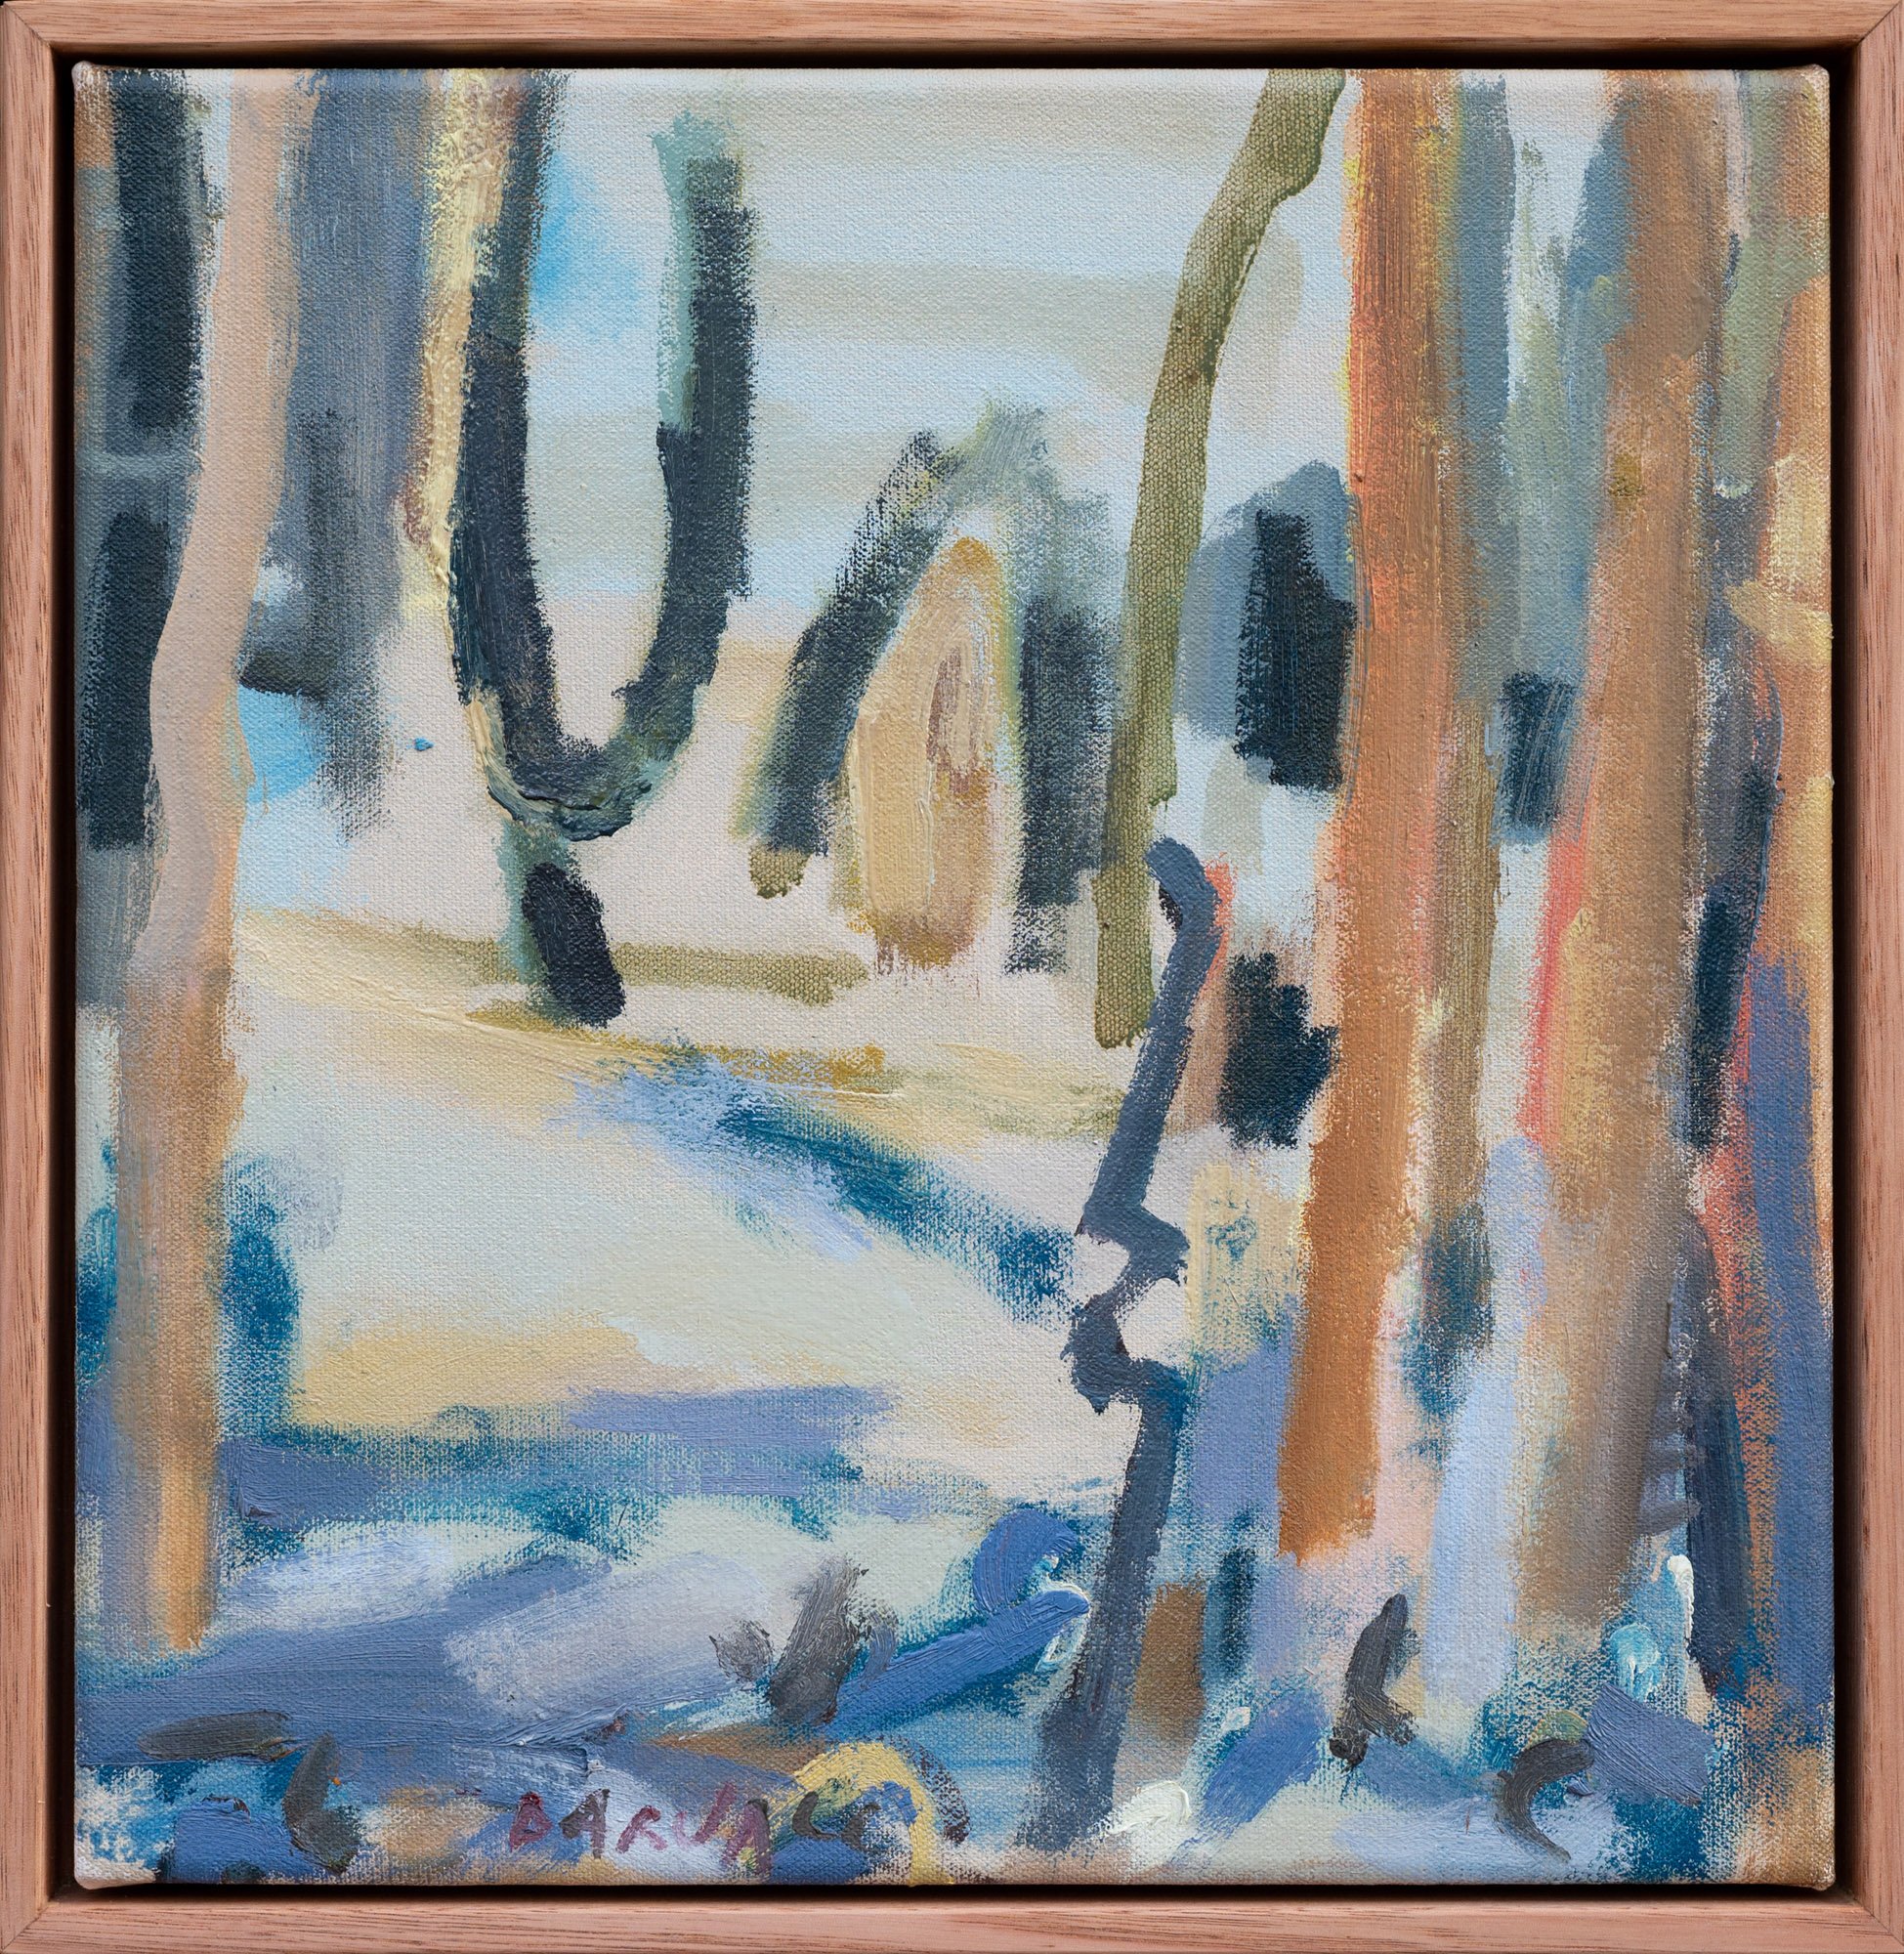  Forest Series no 5 2023 oil in canvas 31 x 31 cm. Available contact Linton and Kay Galleries Perth. 